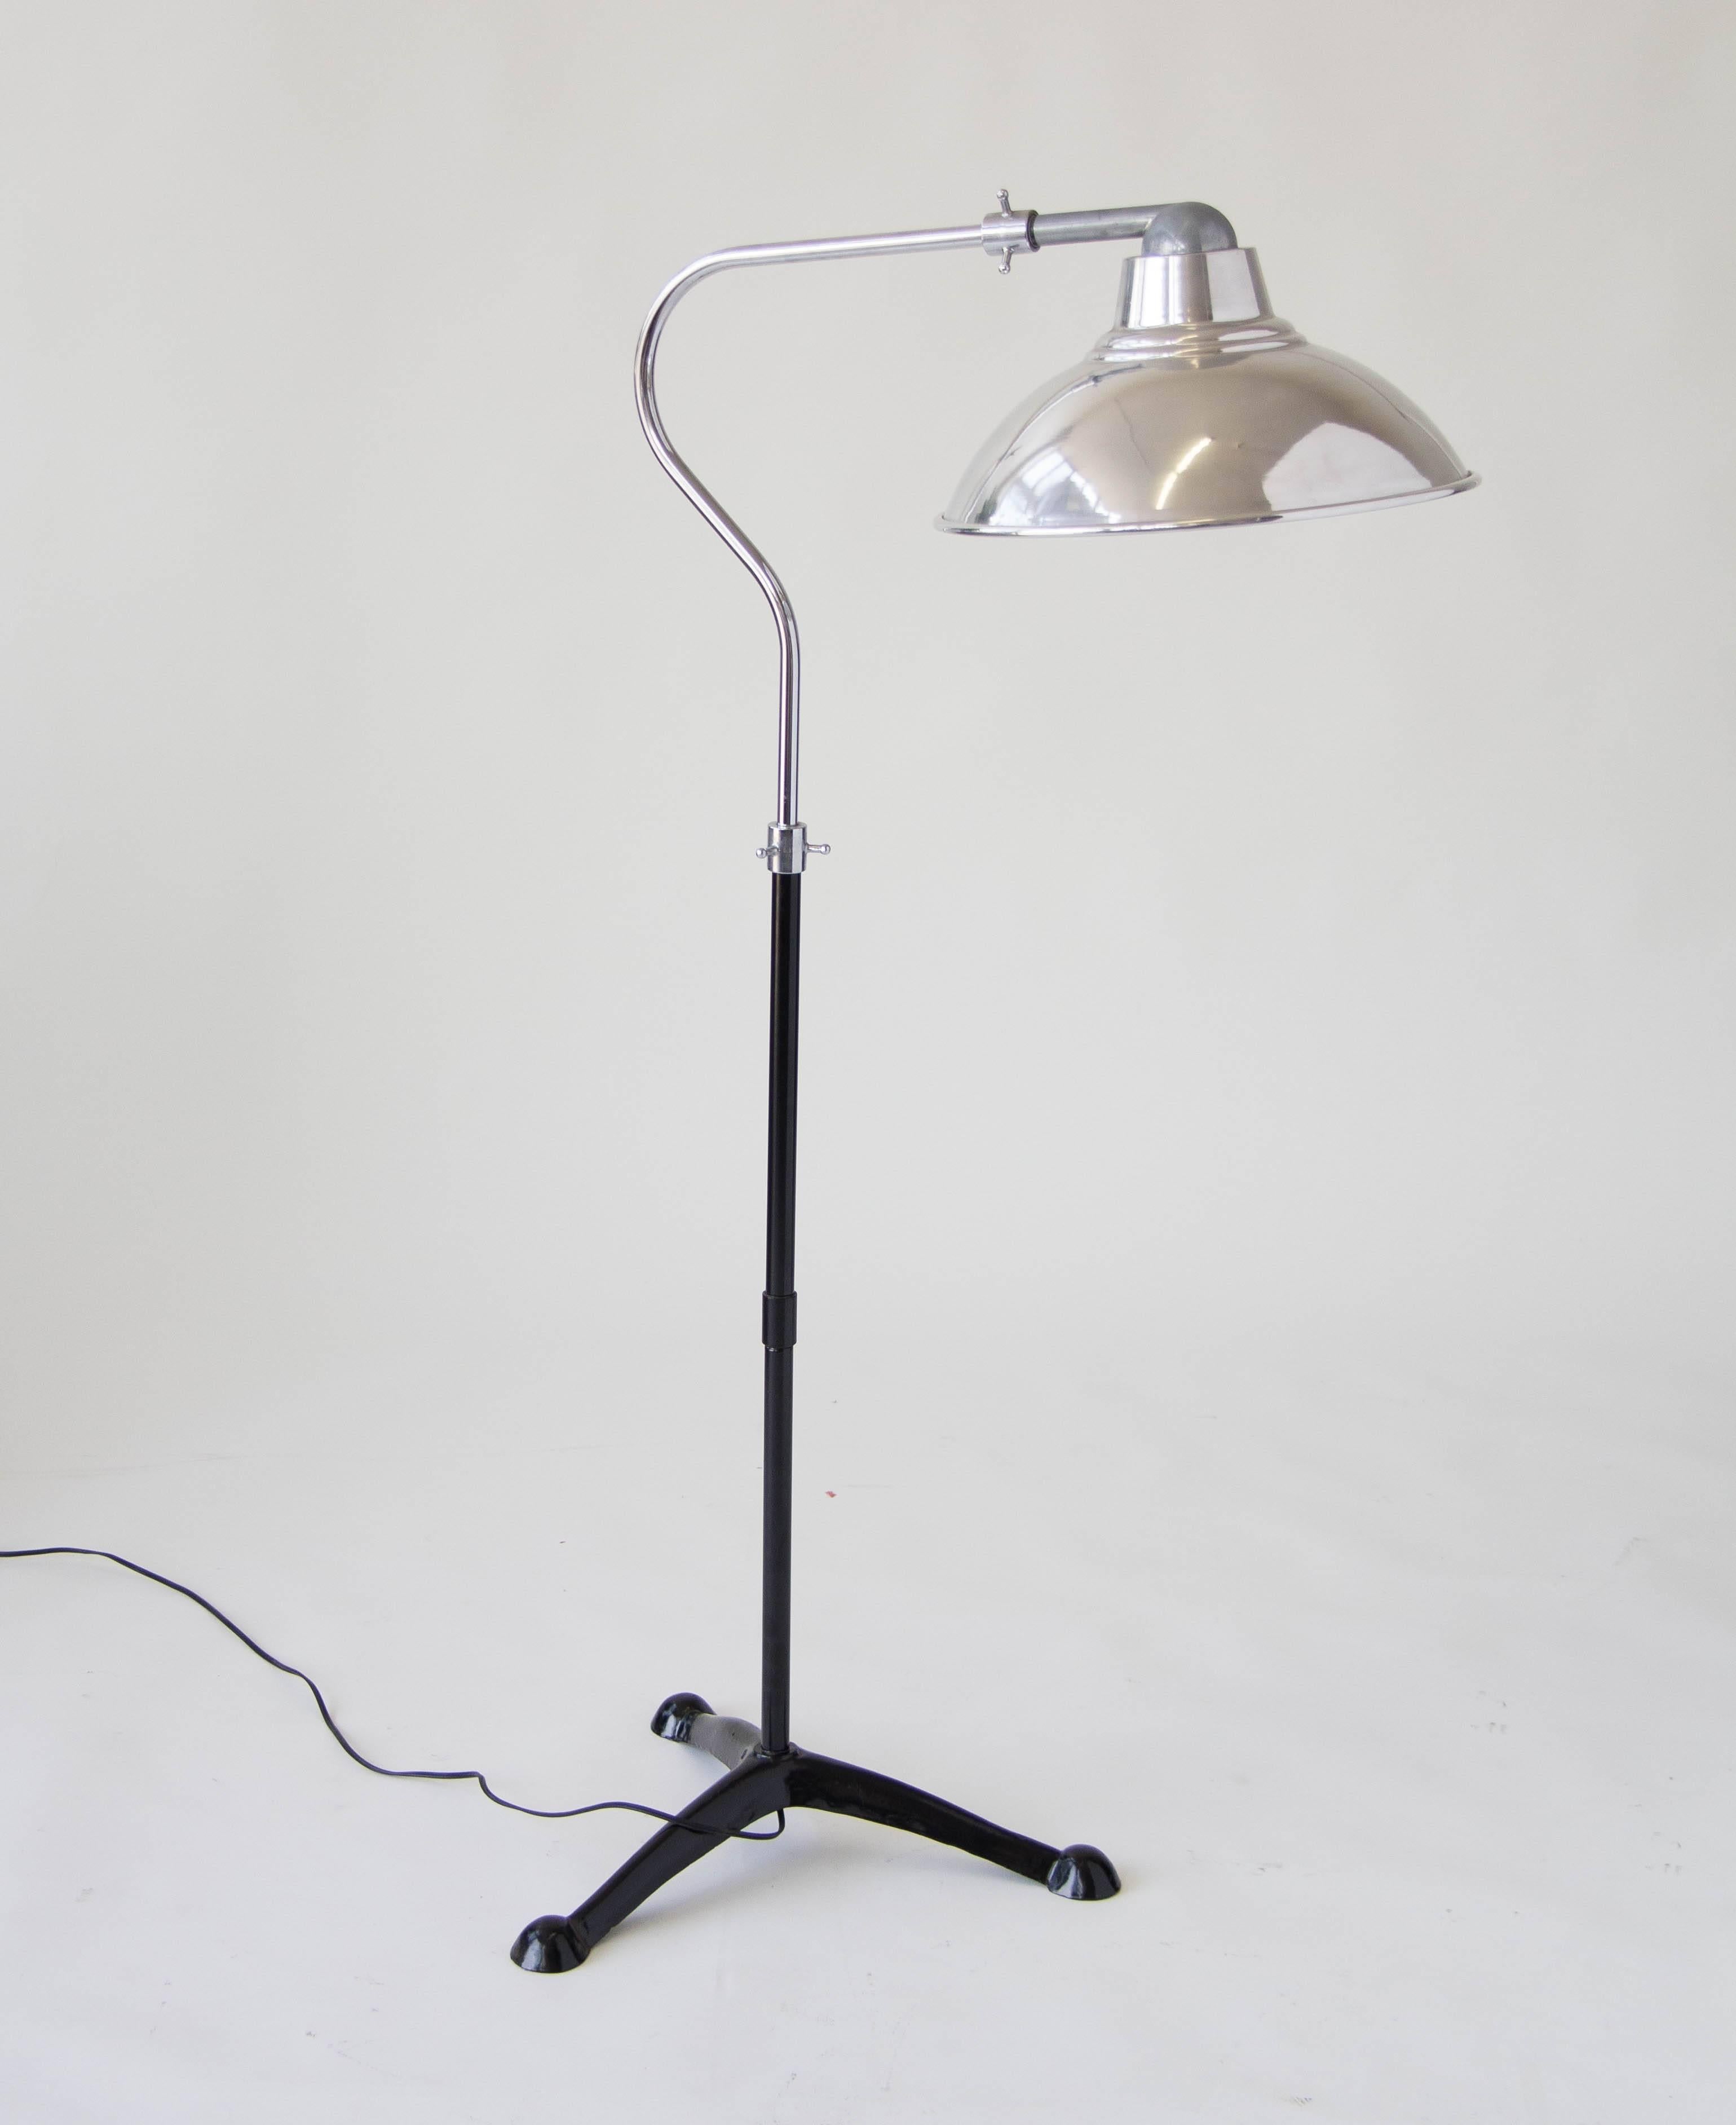 A vintage floor lamp with aluminum shade and an exaggerated gooseneck, on a black enameled metal base with three legs. Lamp shade rotates 360º and the column height is adjustable. 

Condition: Excellent vintage condition; aluminum parts have